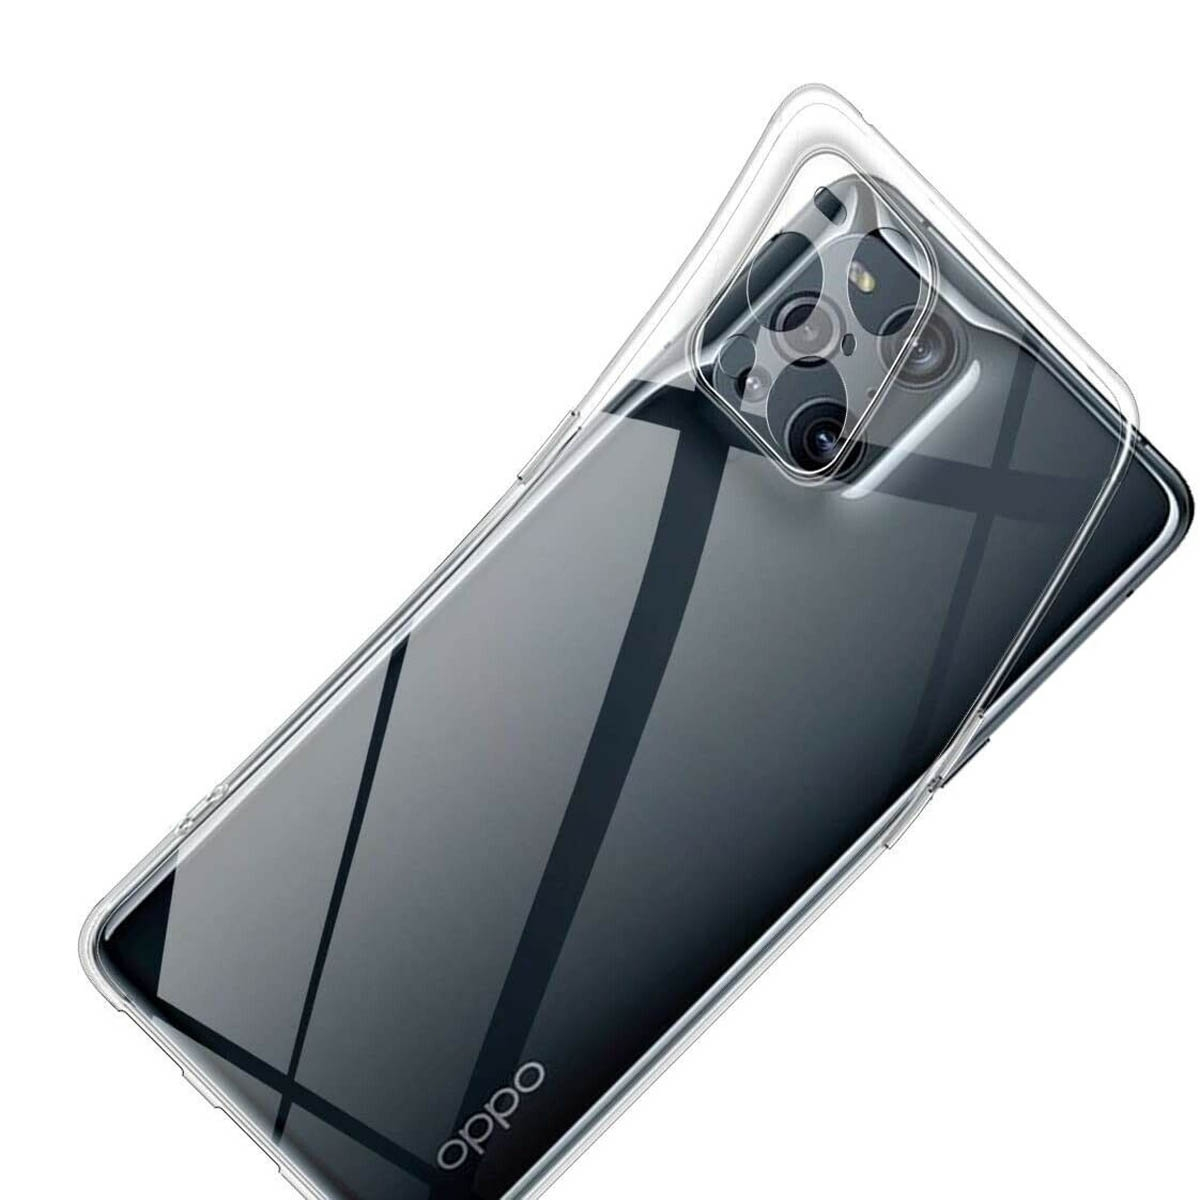 Backcover, CA4, CASEONLINE Oppo, Transparent 5G, Pro X3 Find